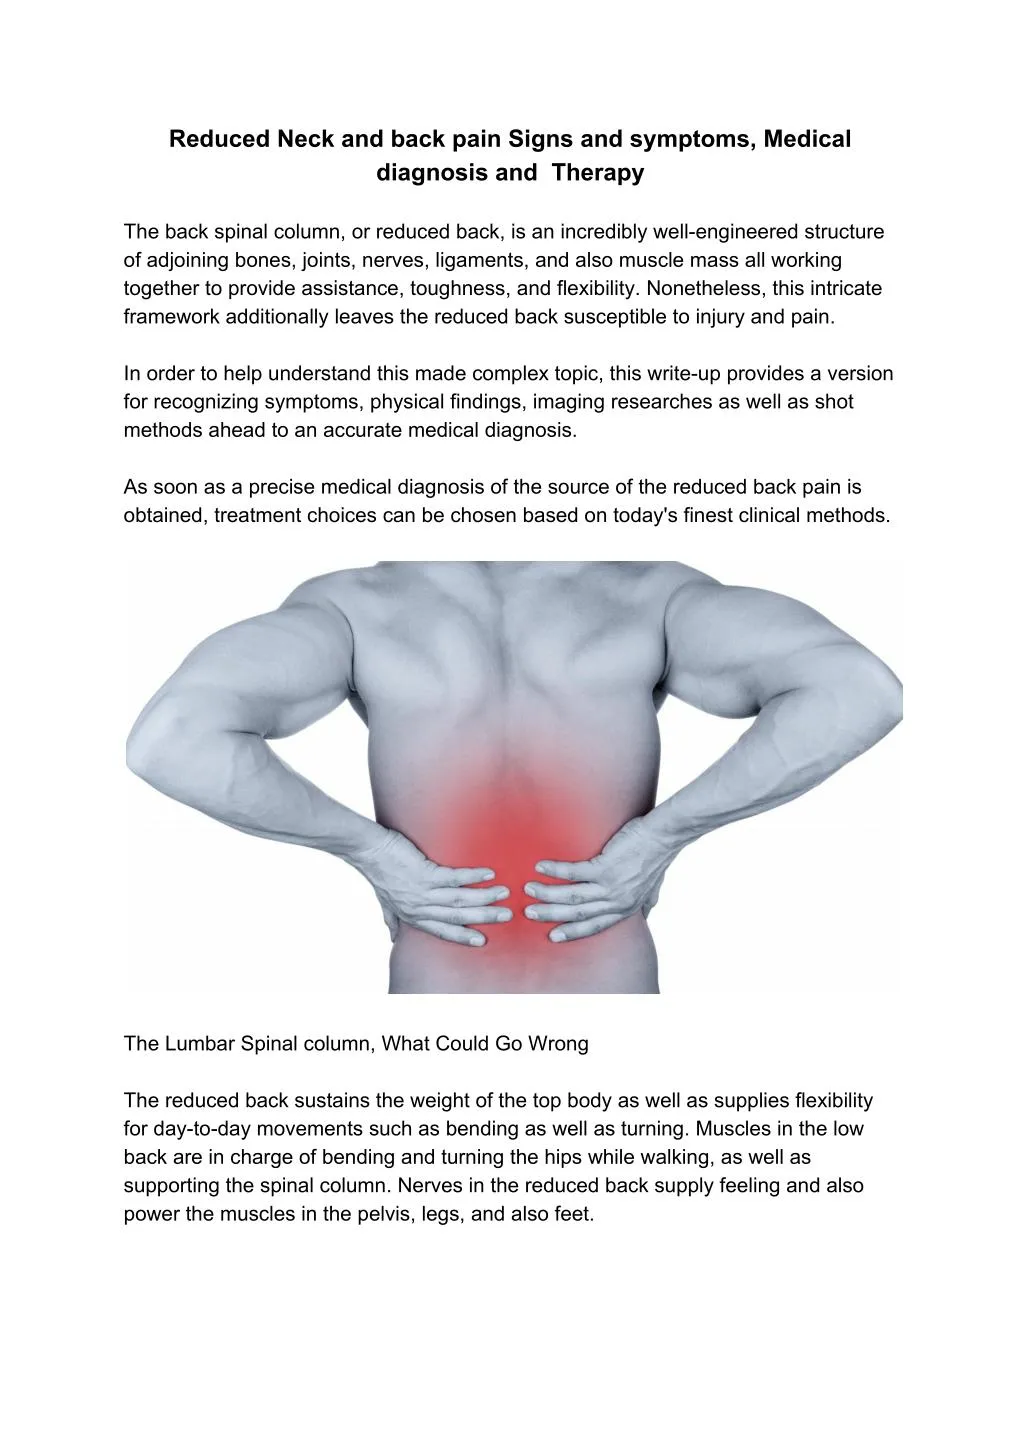 reduced neck and back pain signs and symptoms